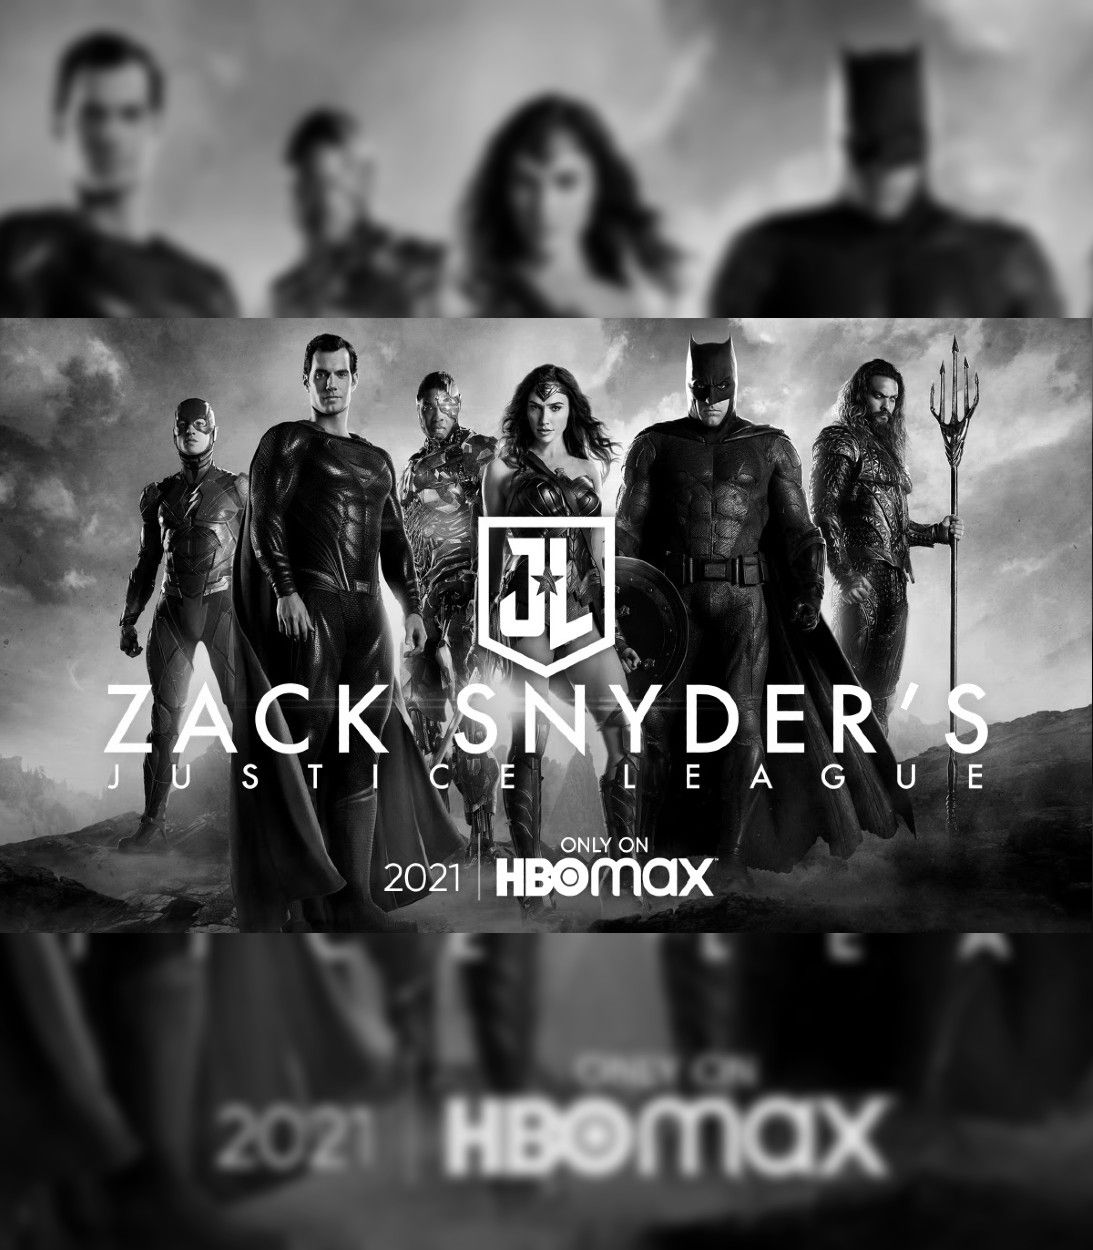 Justice League Snyder Cut Confirmed For HBO Max Release